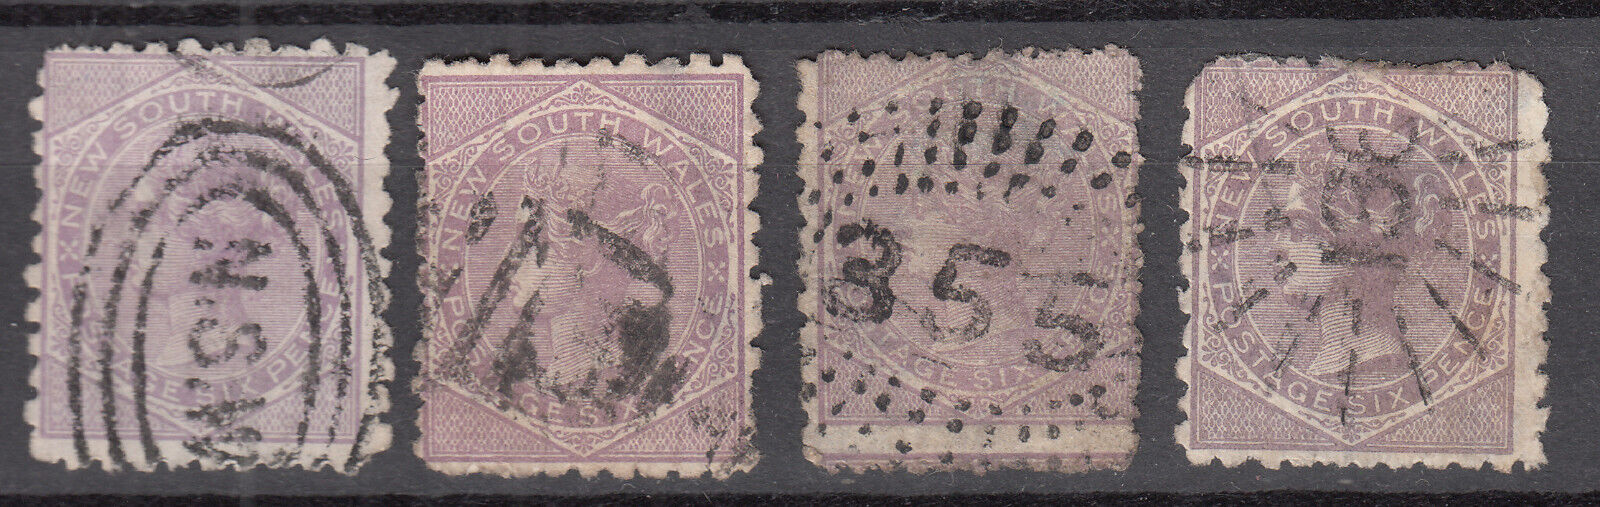 New South Wales - 1882 Qv "6p"  Cancel Stamp Lot  Sc# 66 (9316)